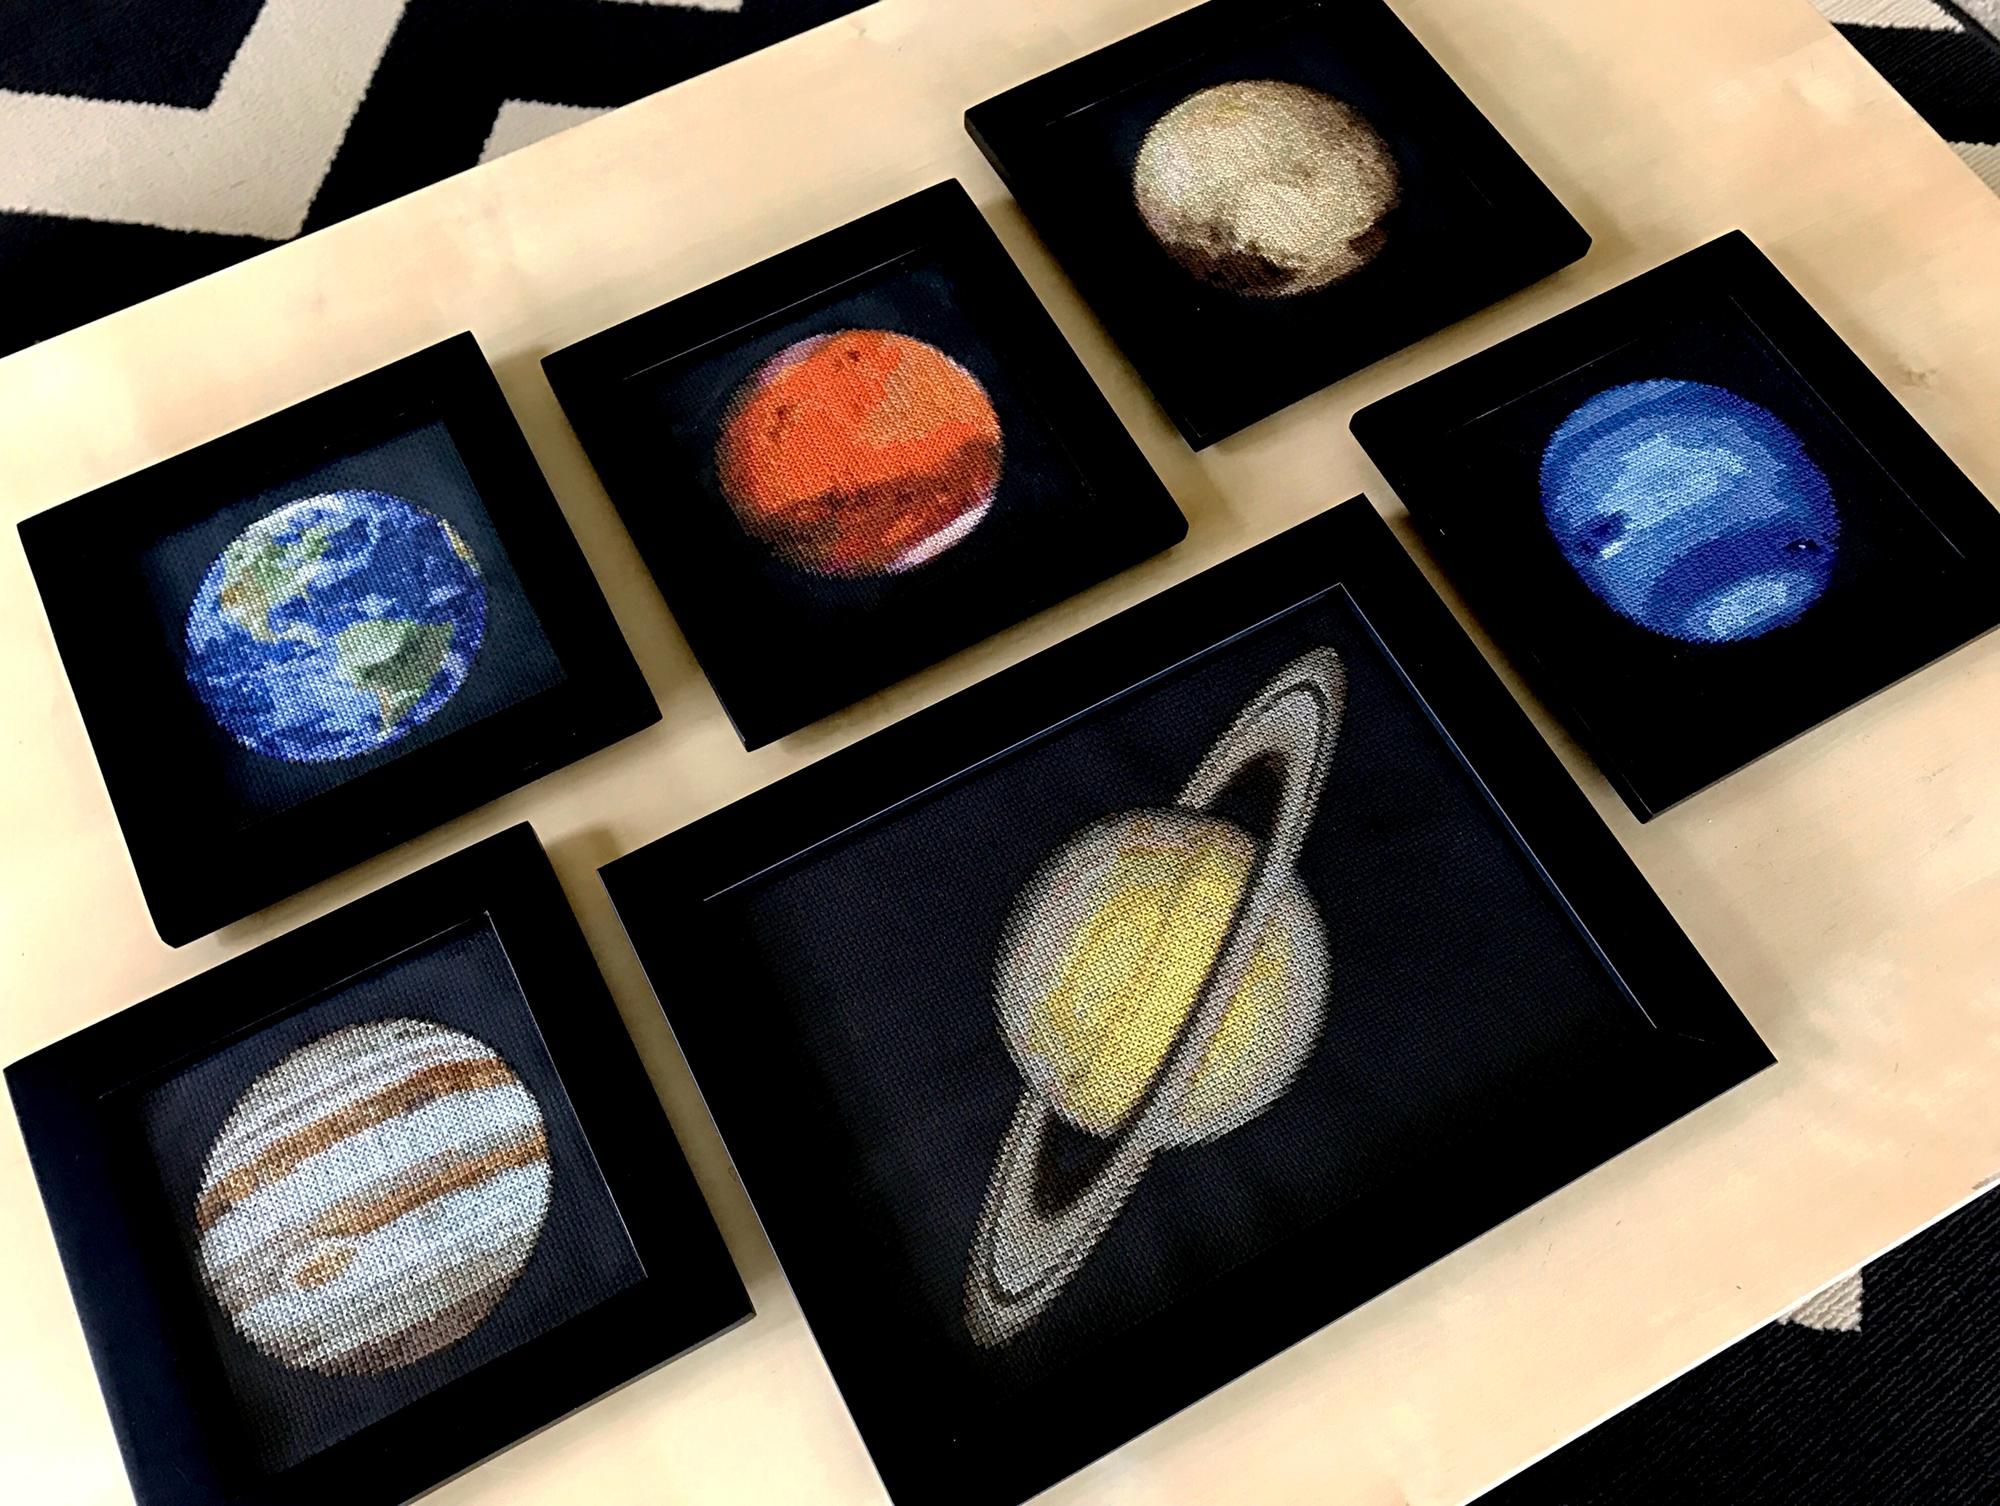 I'm cross-stitching the solar system and just finished Saturn